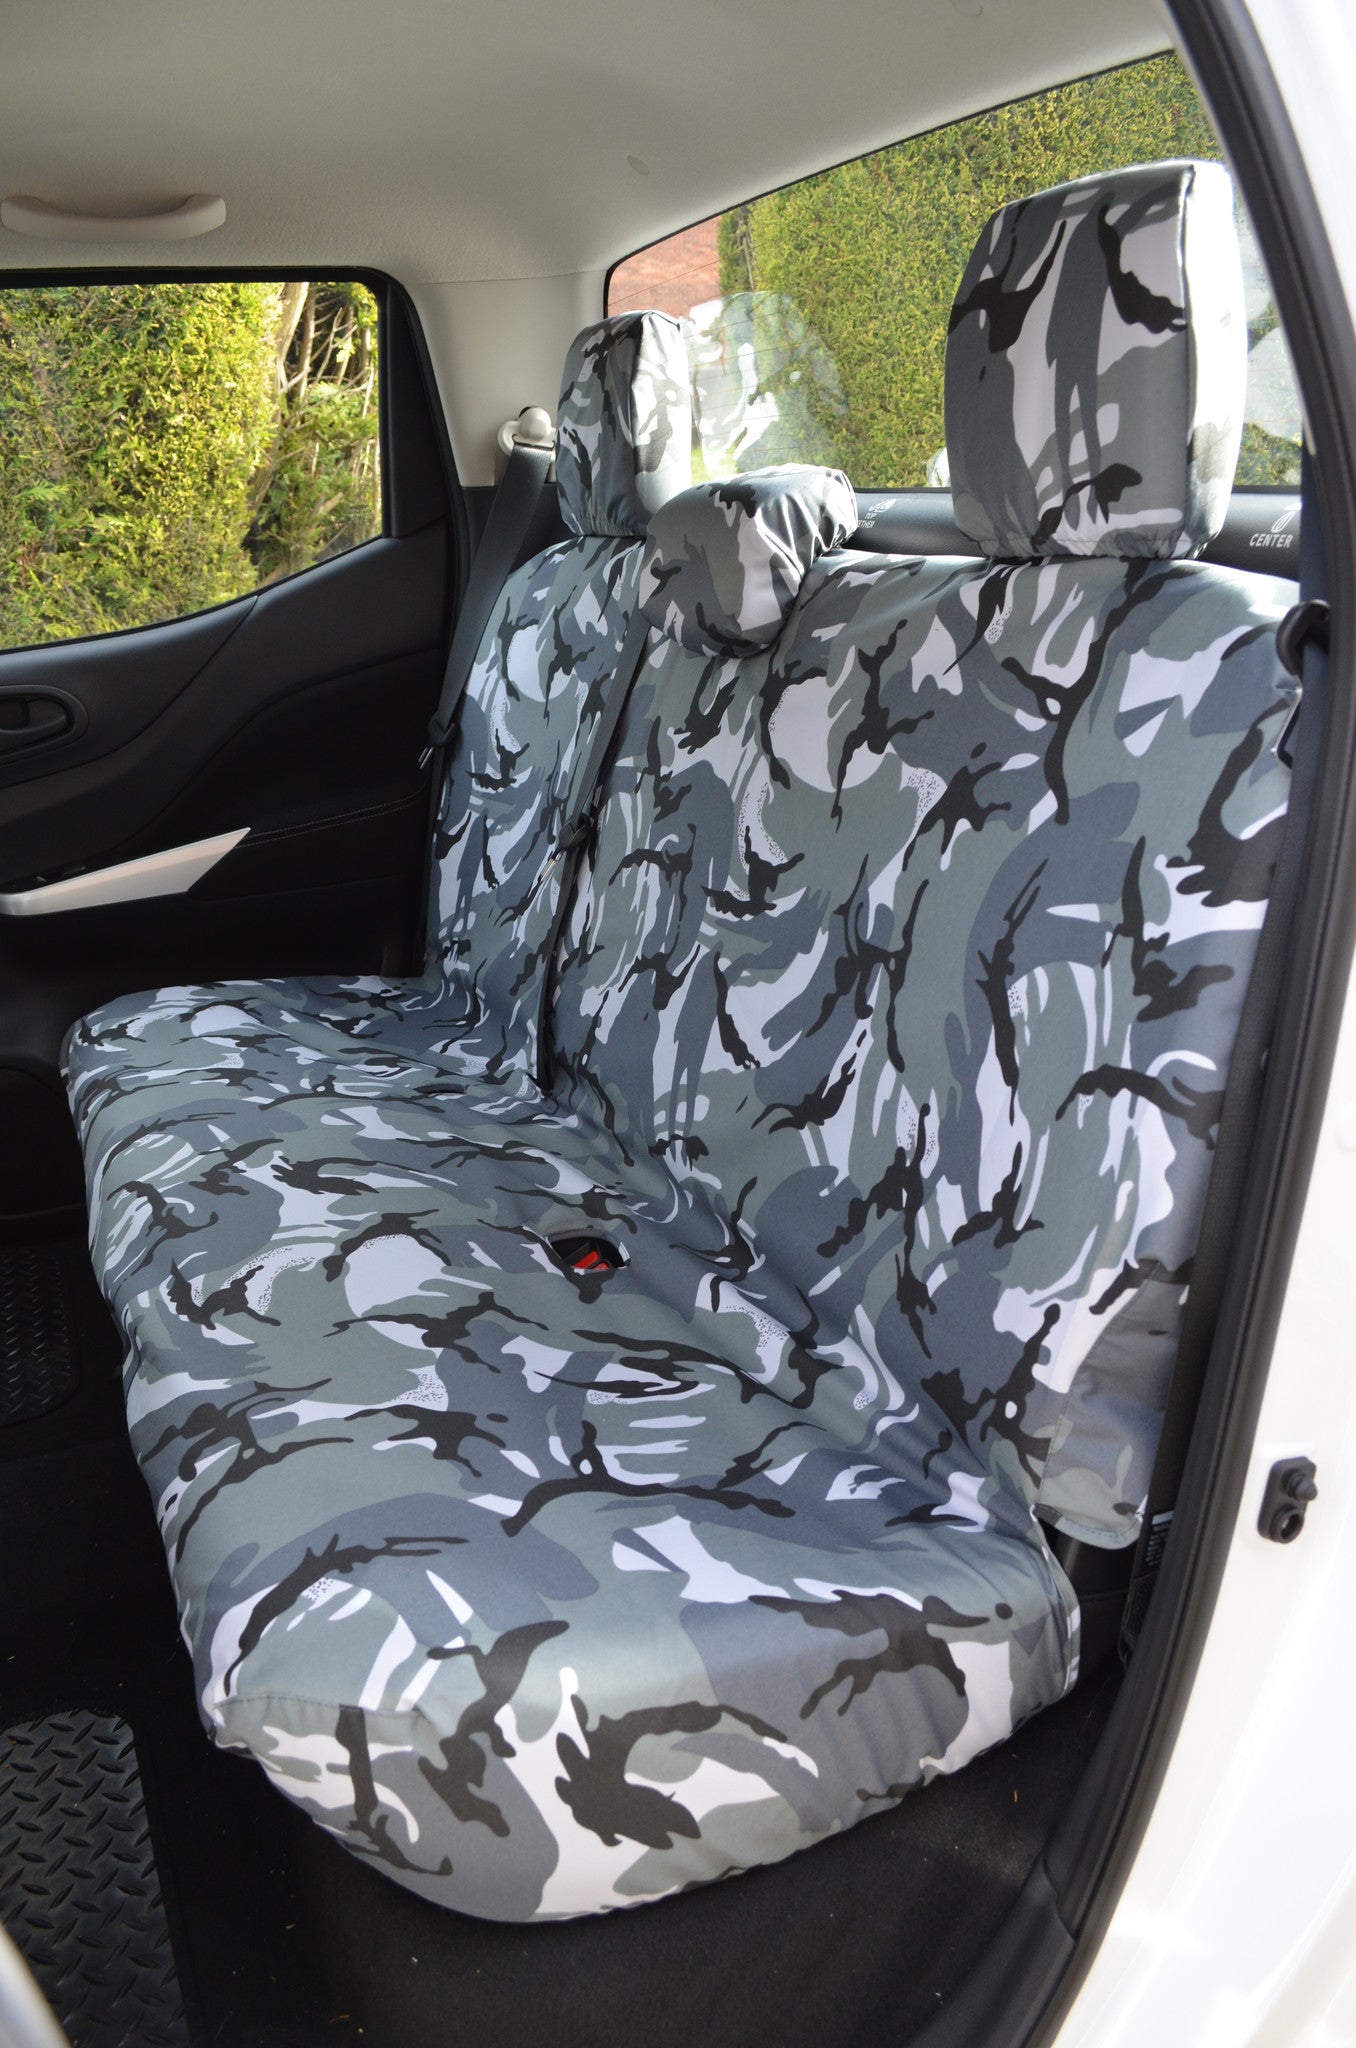 Mercedes-Benz X-Class 2017+ Tailored Waterproof Seat Covers Rear Seats / Urban Camouflage Turtle Covers Ltd